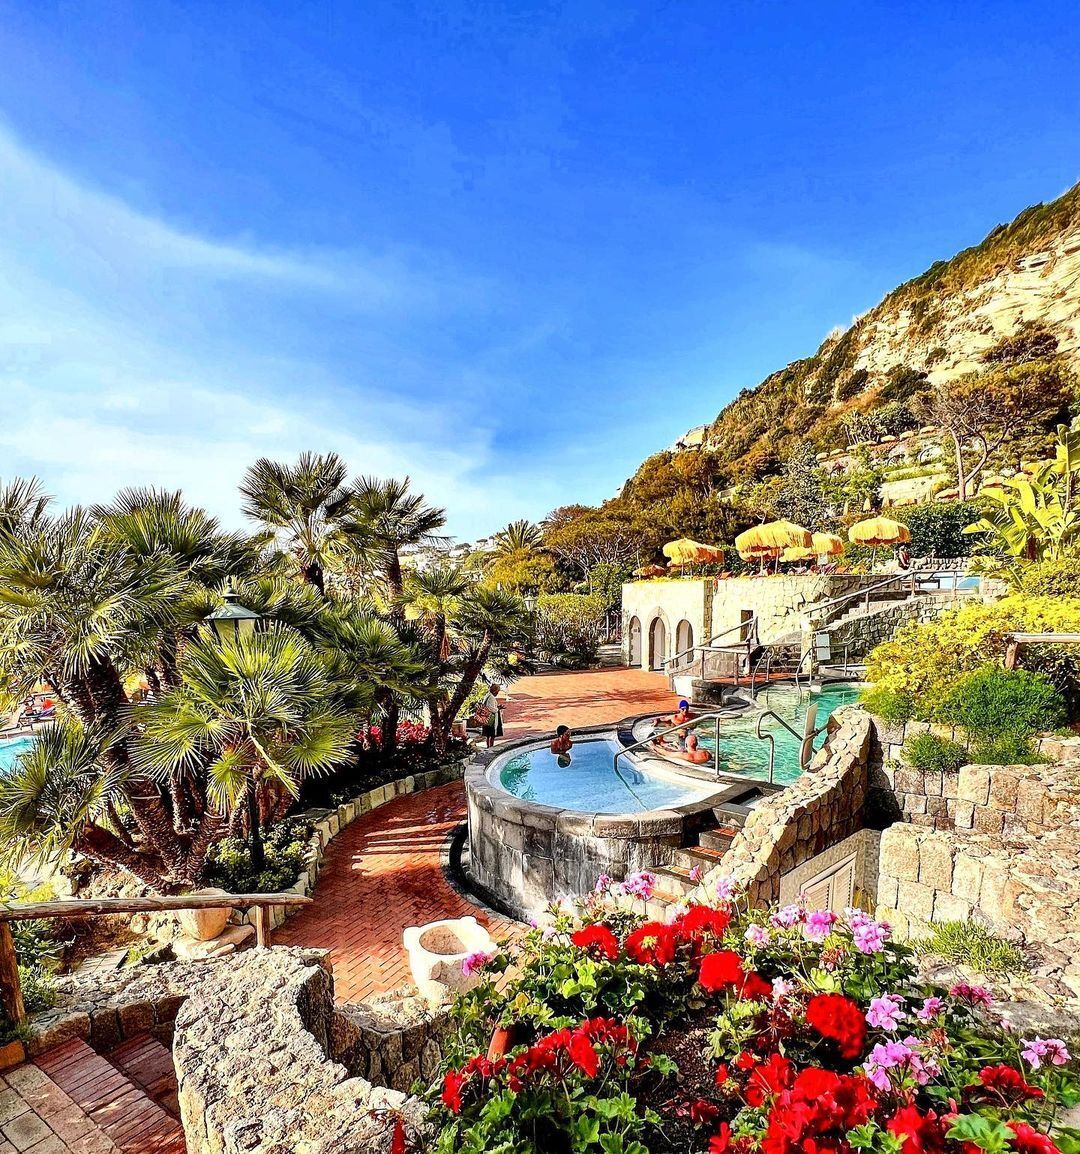 Top 9 resorts with spas in Ischia. Recommendations for treatments and therapies with thermal waters